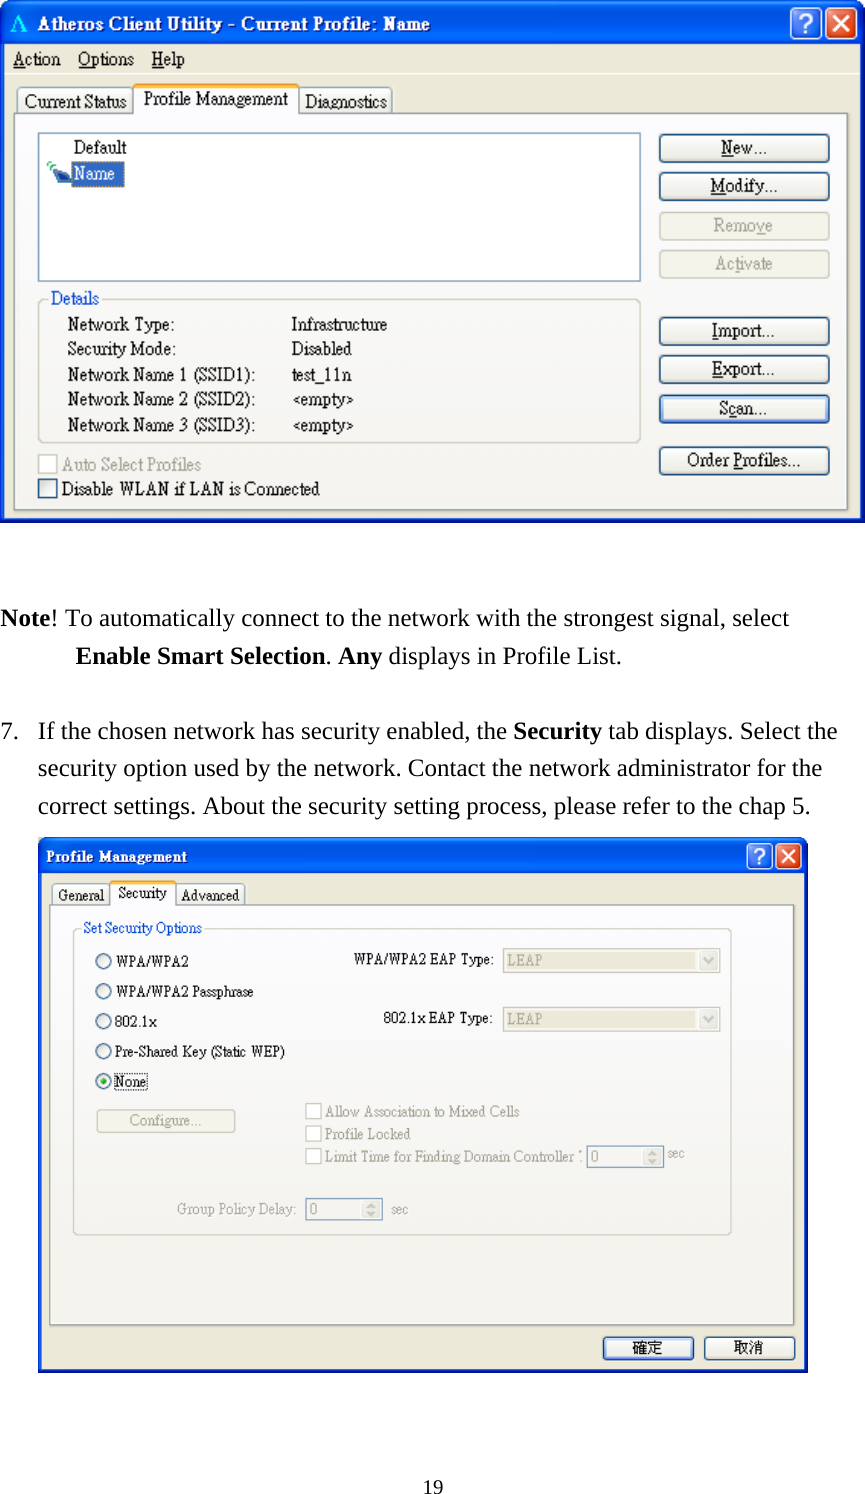  19   Note! To automatically connect to the network with the strongest signal, select Enable Smart Selection. Any displays in Profile List.  7. If the chosen network has security enabled, the Security tab displays. Select the security option used by the network. Contact the network administrator for the correct settings. About the security setting process, please refer to the chap 5.   